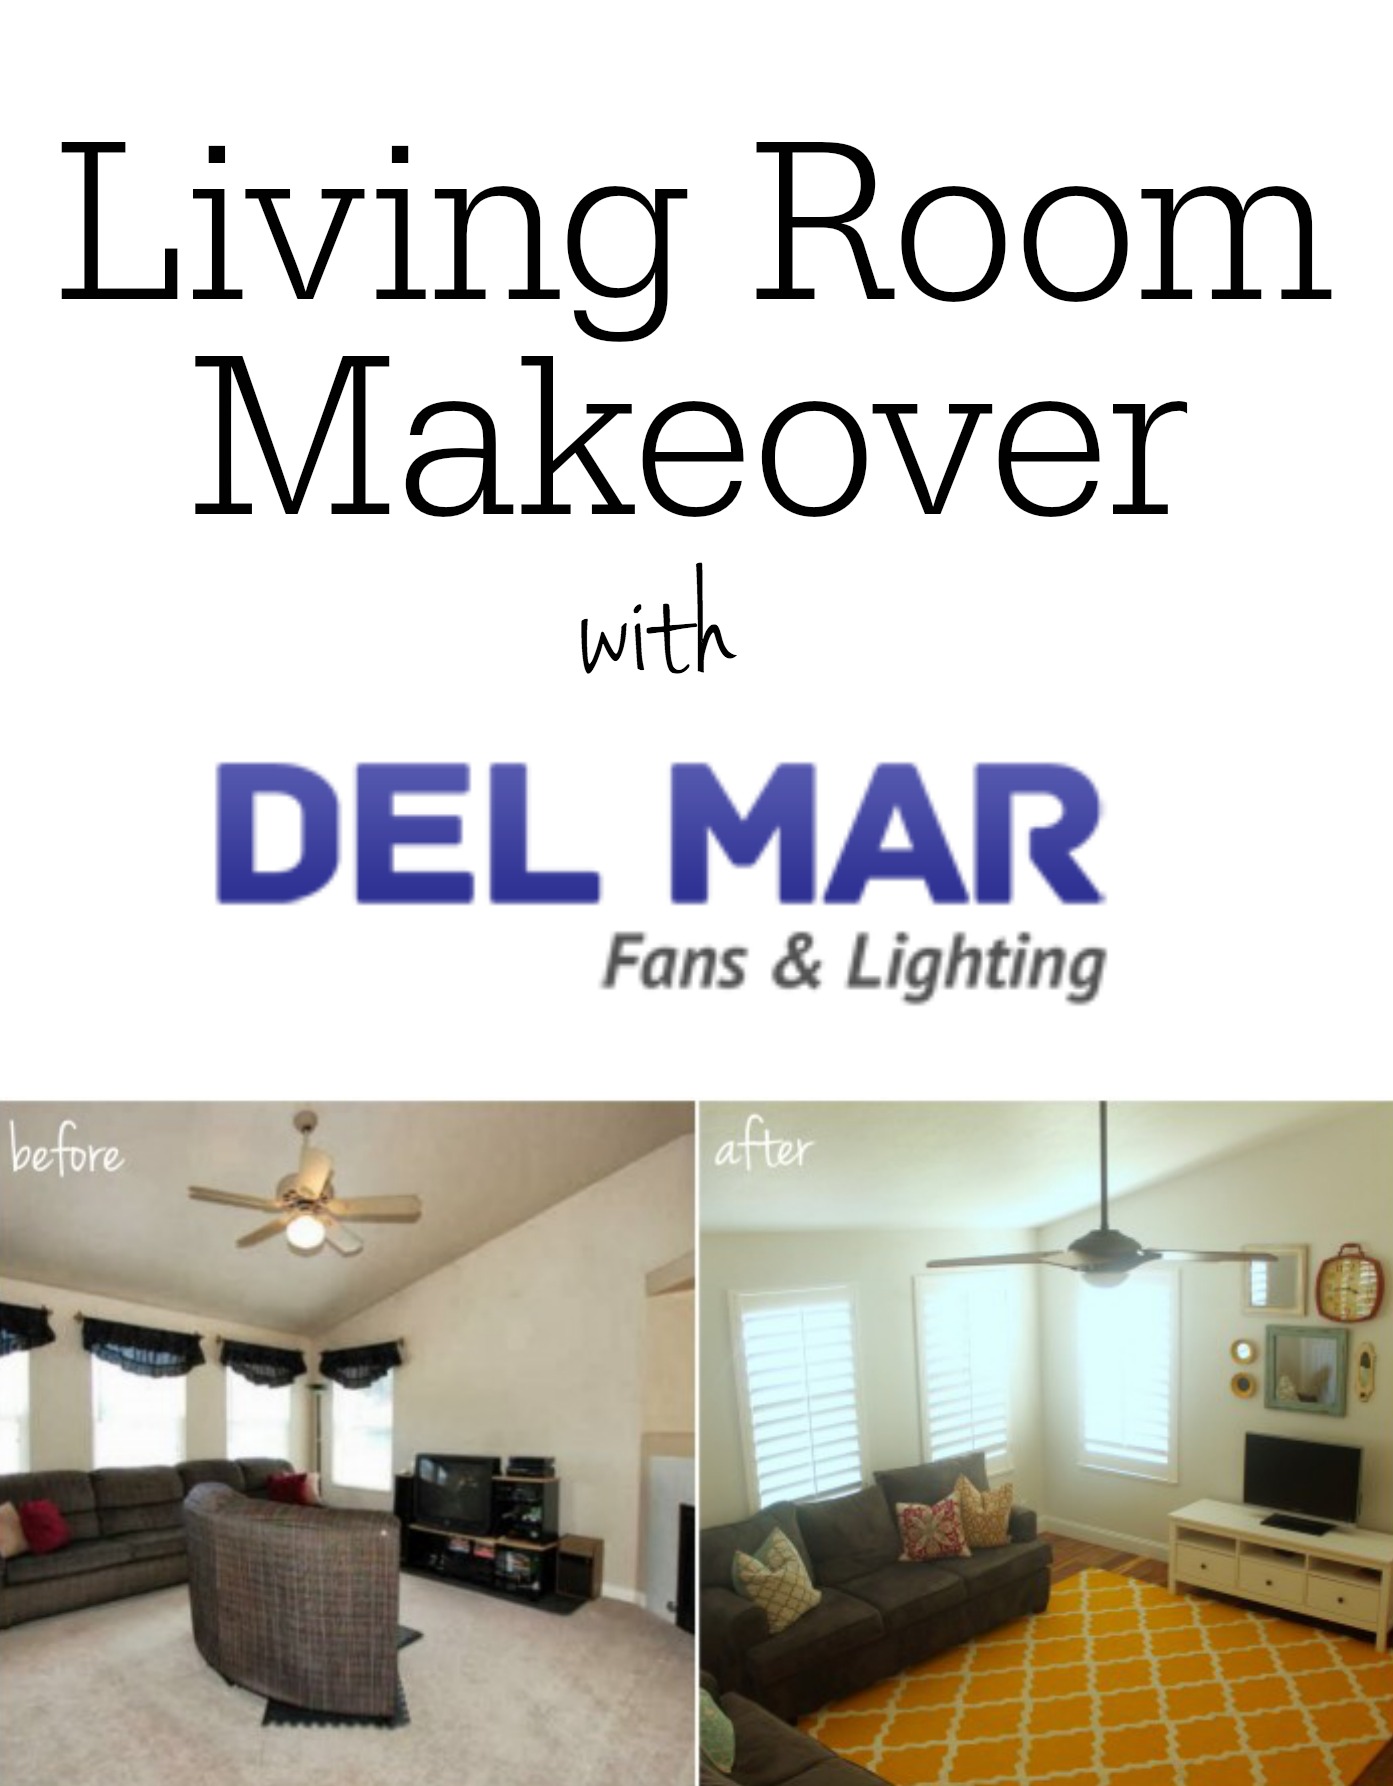 Living Room Makeover with Del Mar Fans